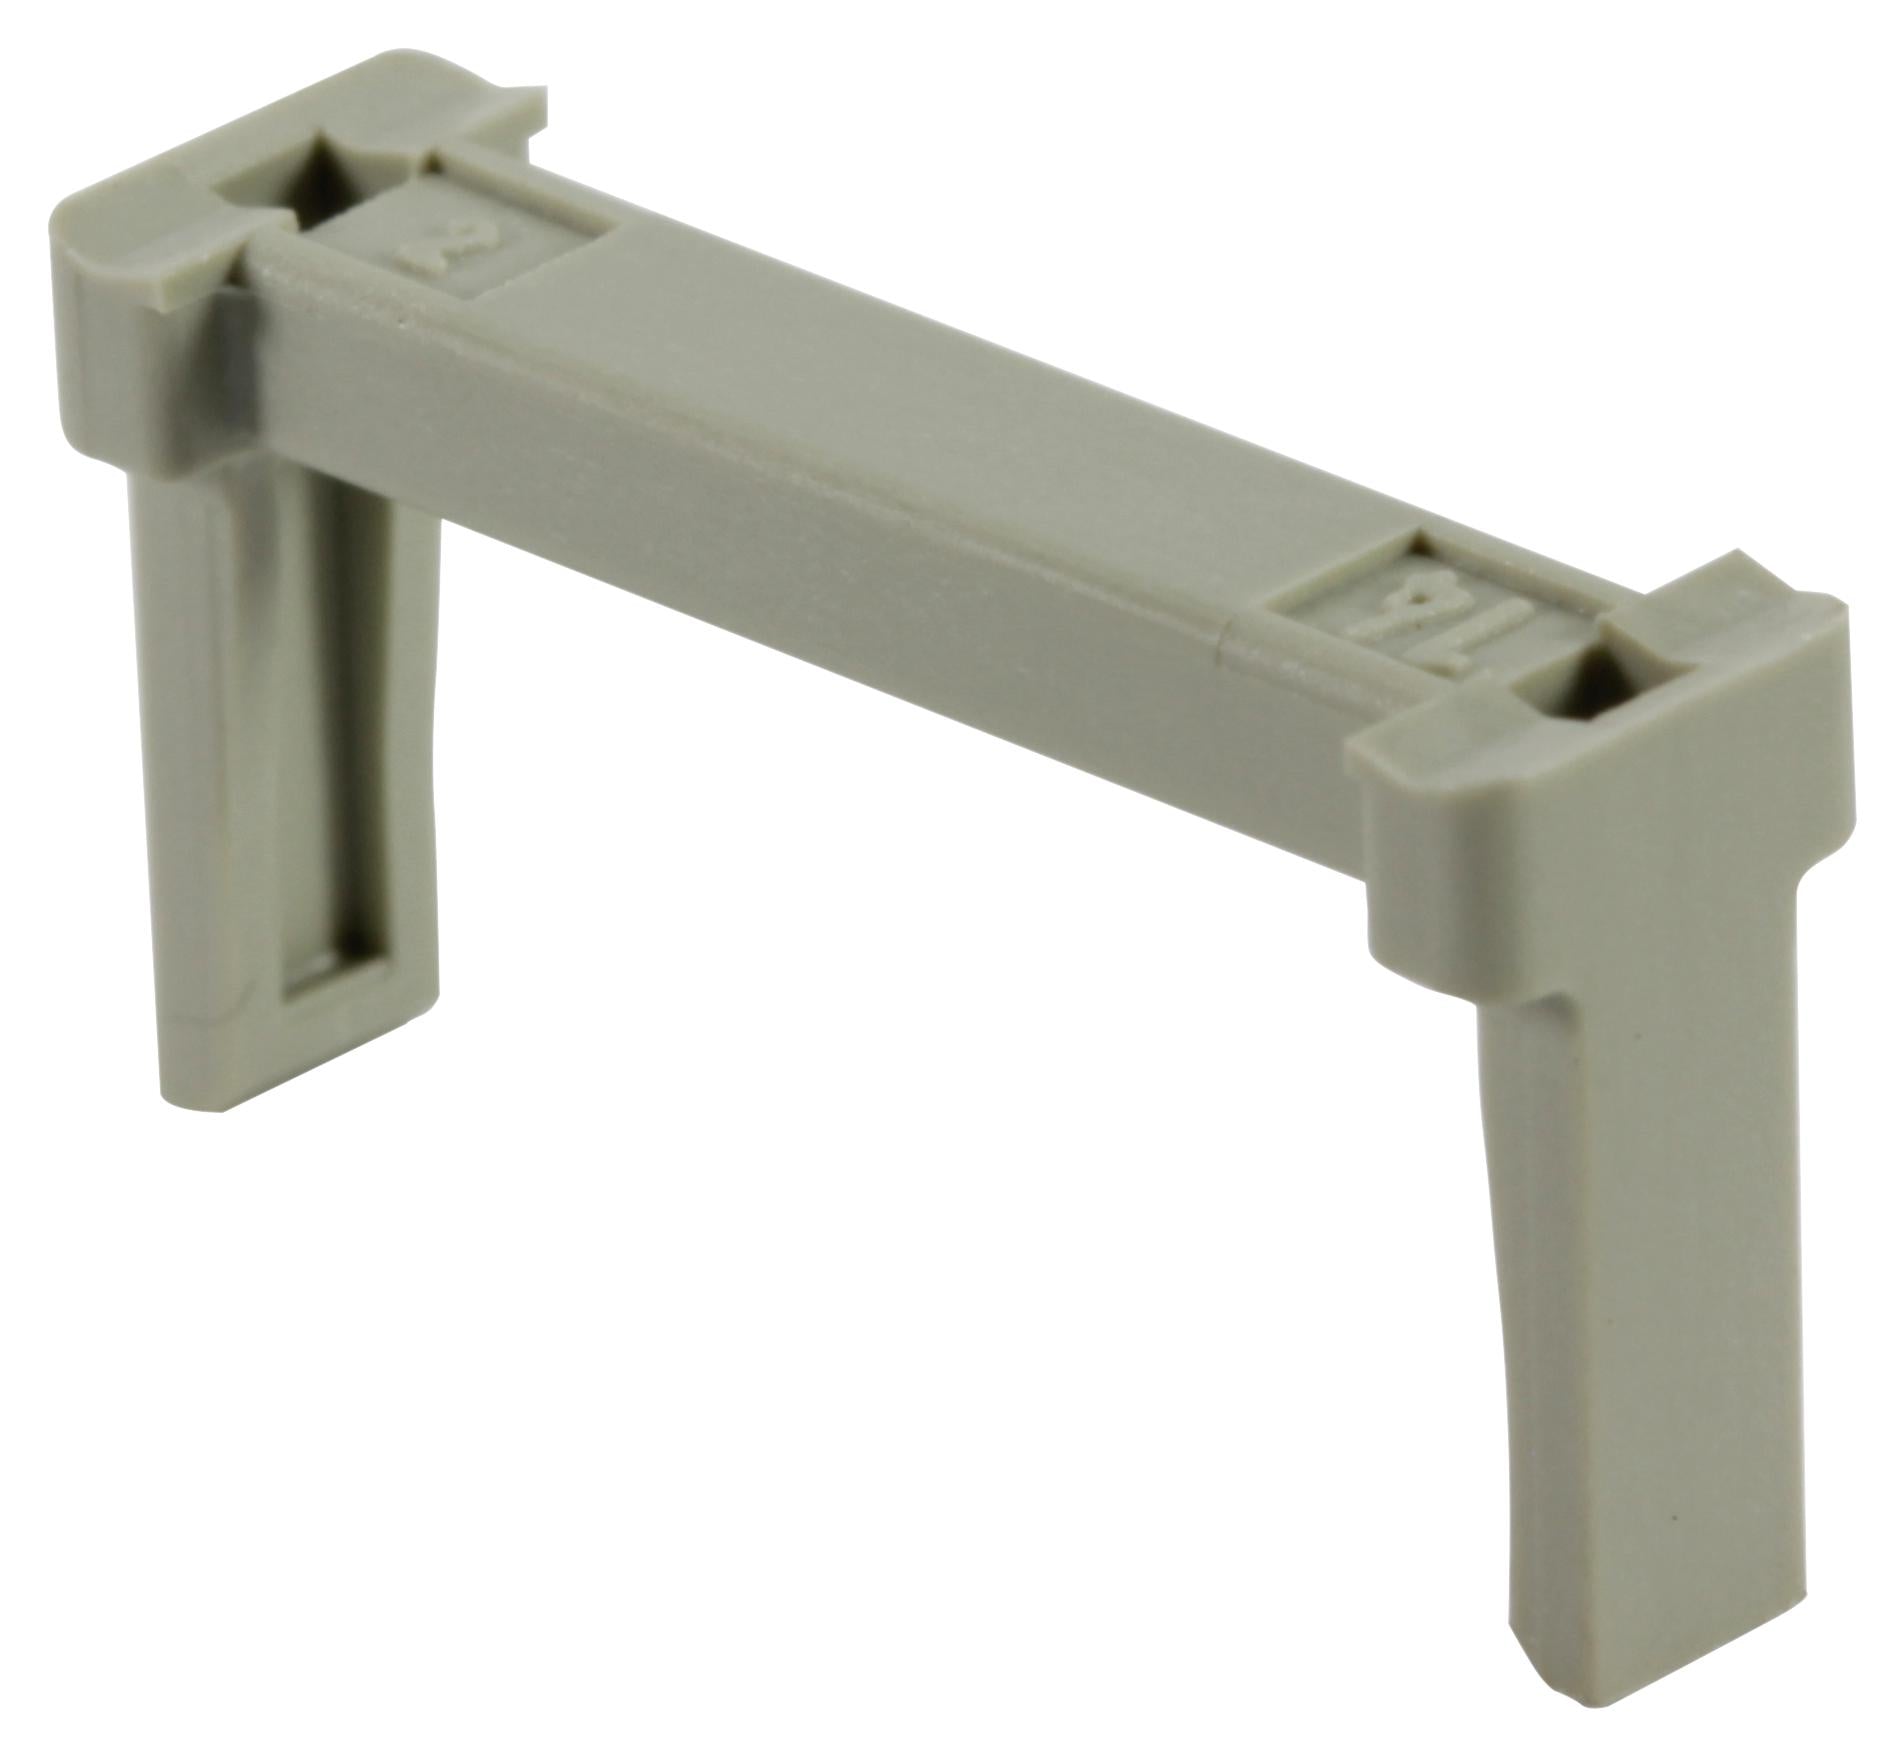 09185069002 STRAIN RELIEF CLAMP, 6POS, RCPT CONN HARTING